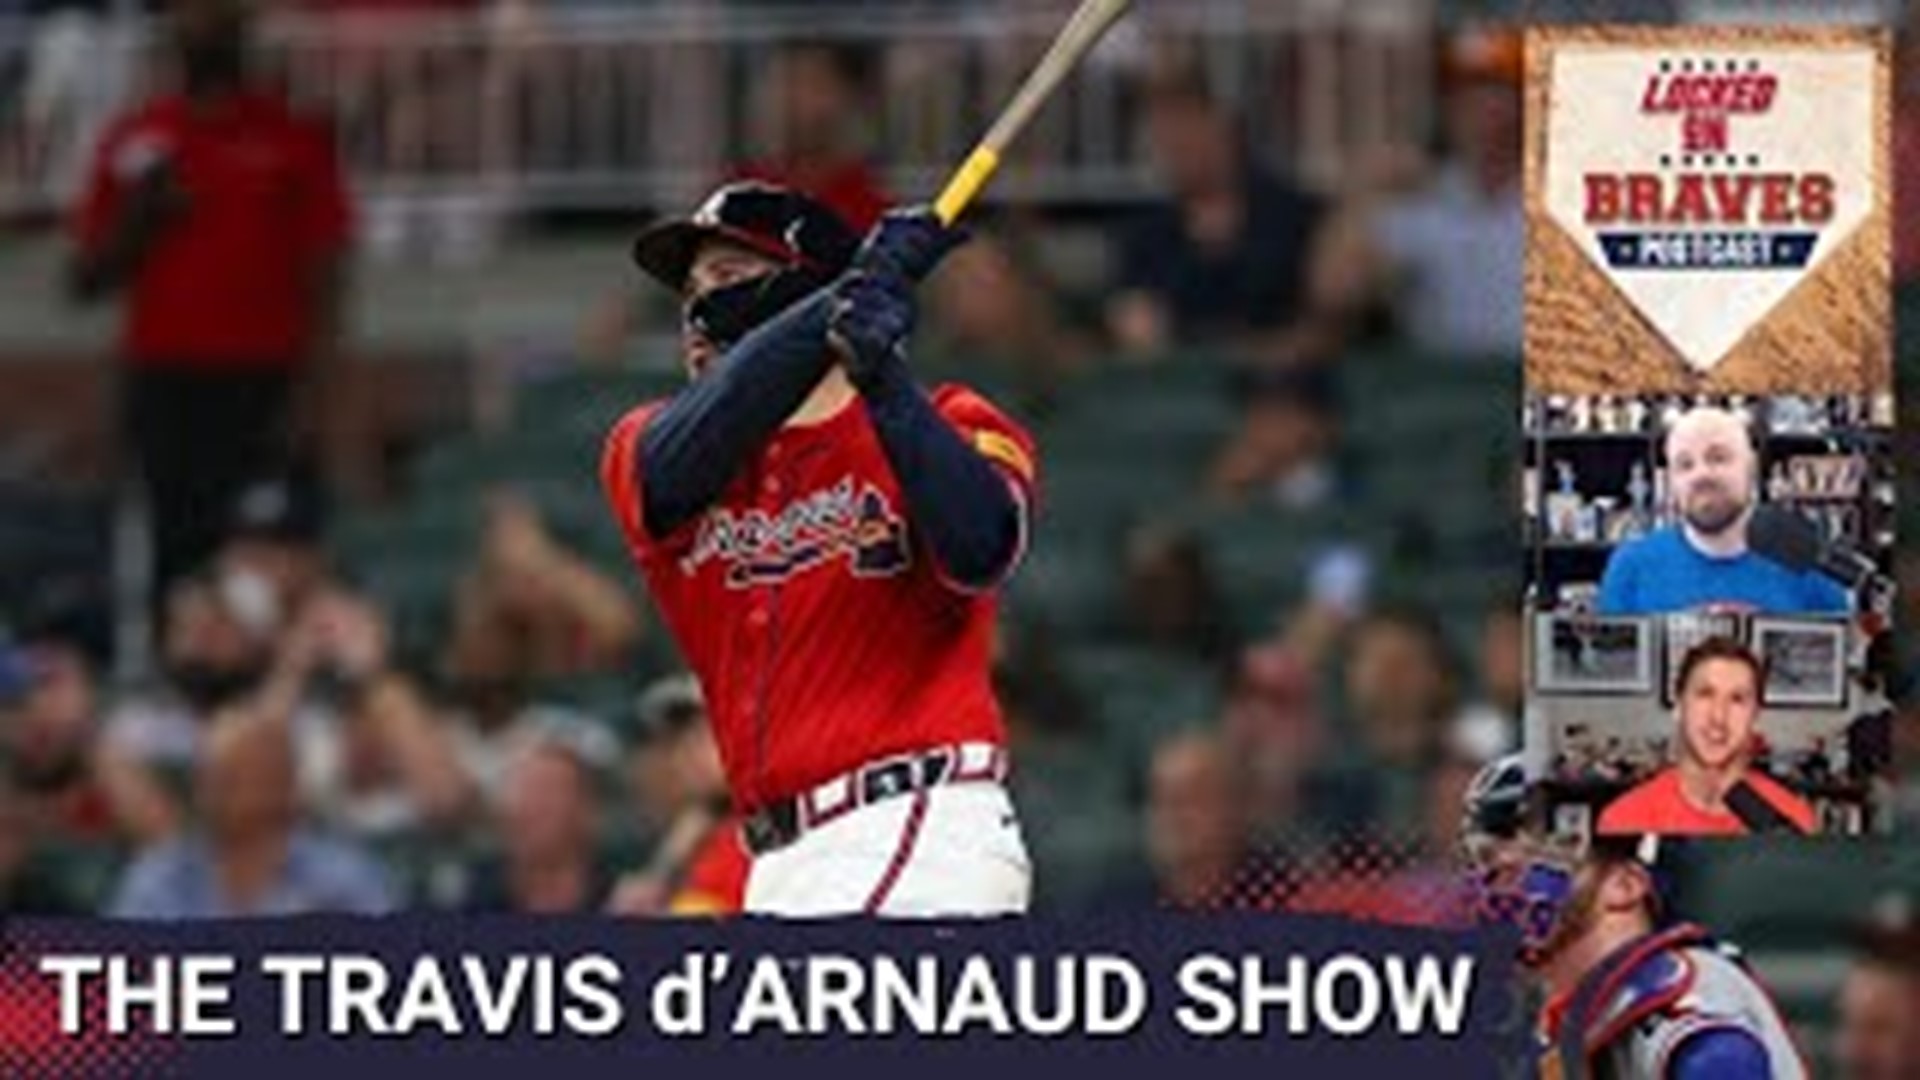 It was a career-night for Atlanta Braves catcher Travis d'Arnaud. He belted three home runs, including a go-ahead grand slam to send his team to an 8-3 win.